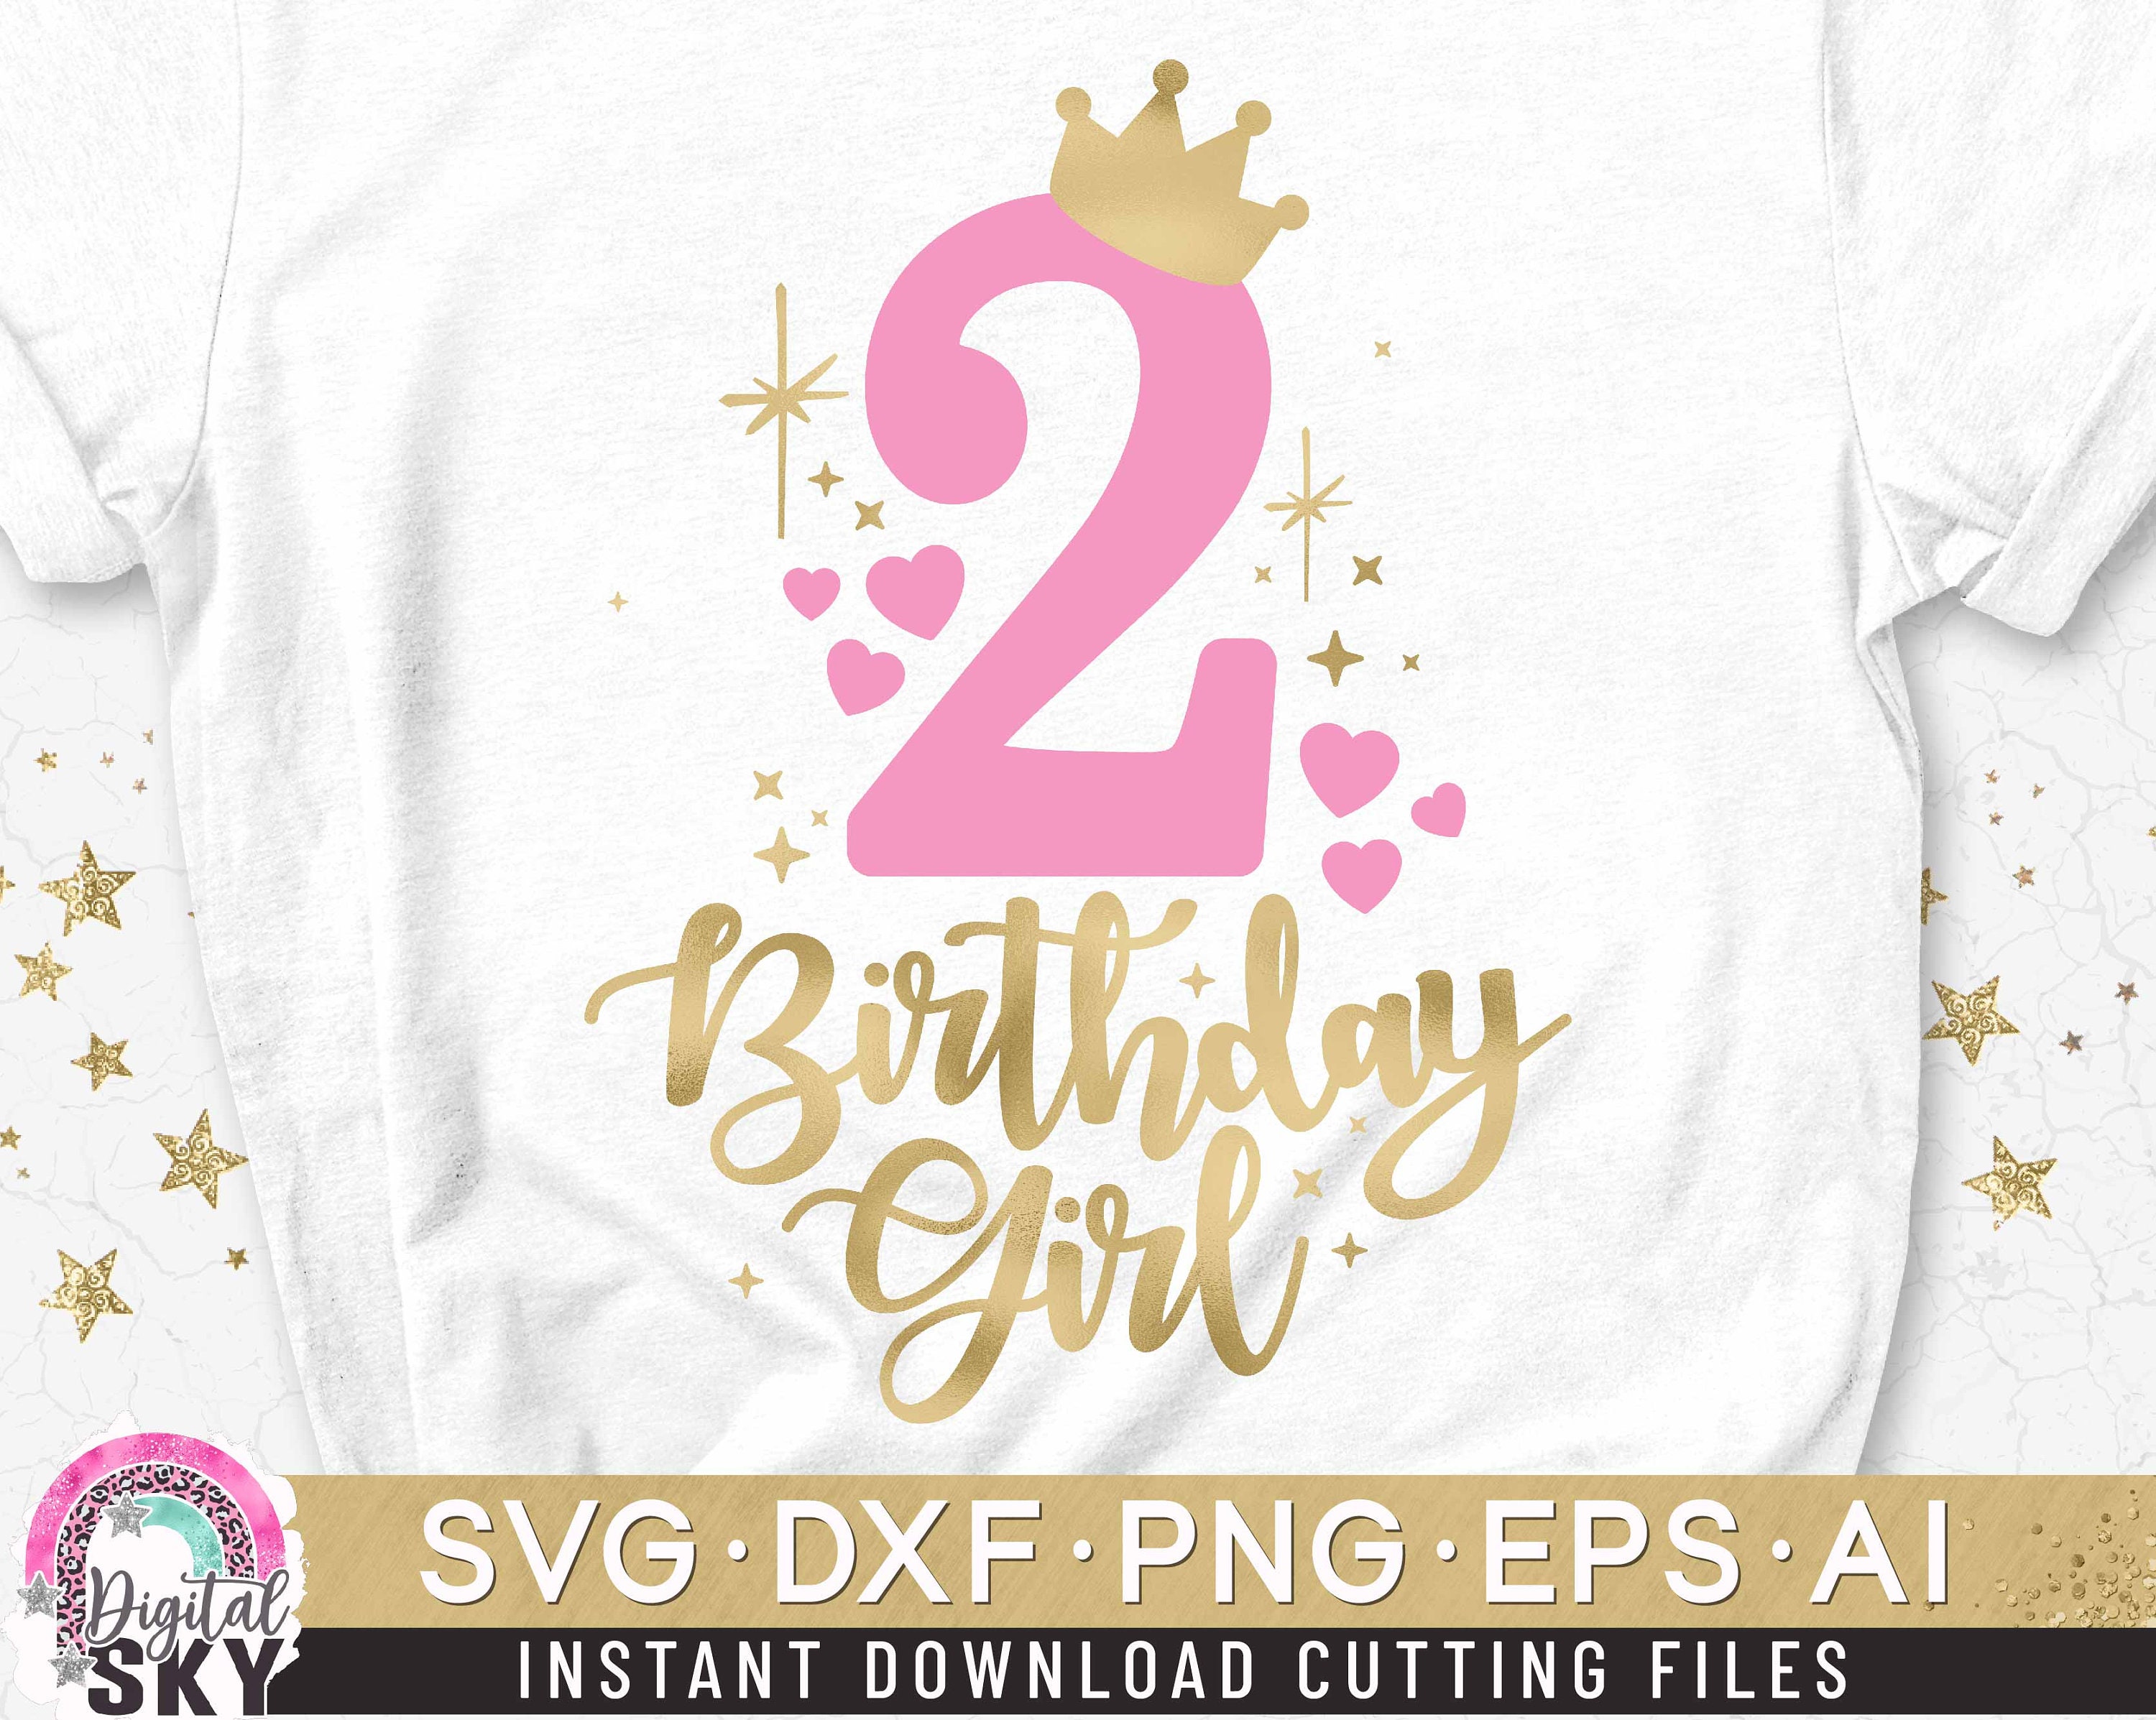 Crown Number 2 - 2nd Birthday & Anniversary (Ancient Gold) Poster for Sale  by theshirtshops